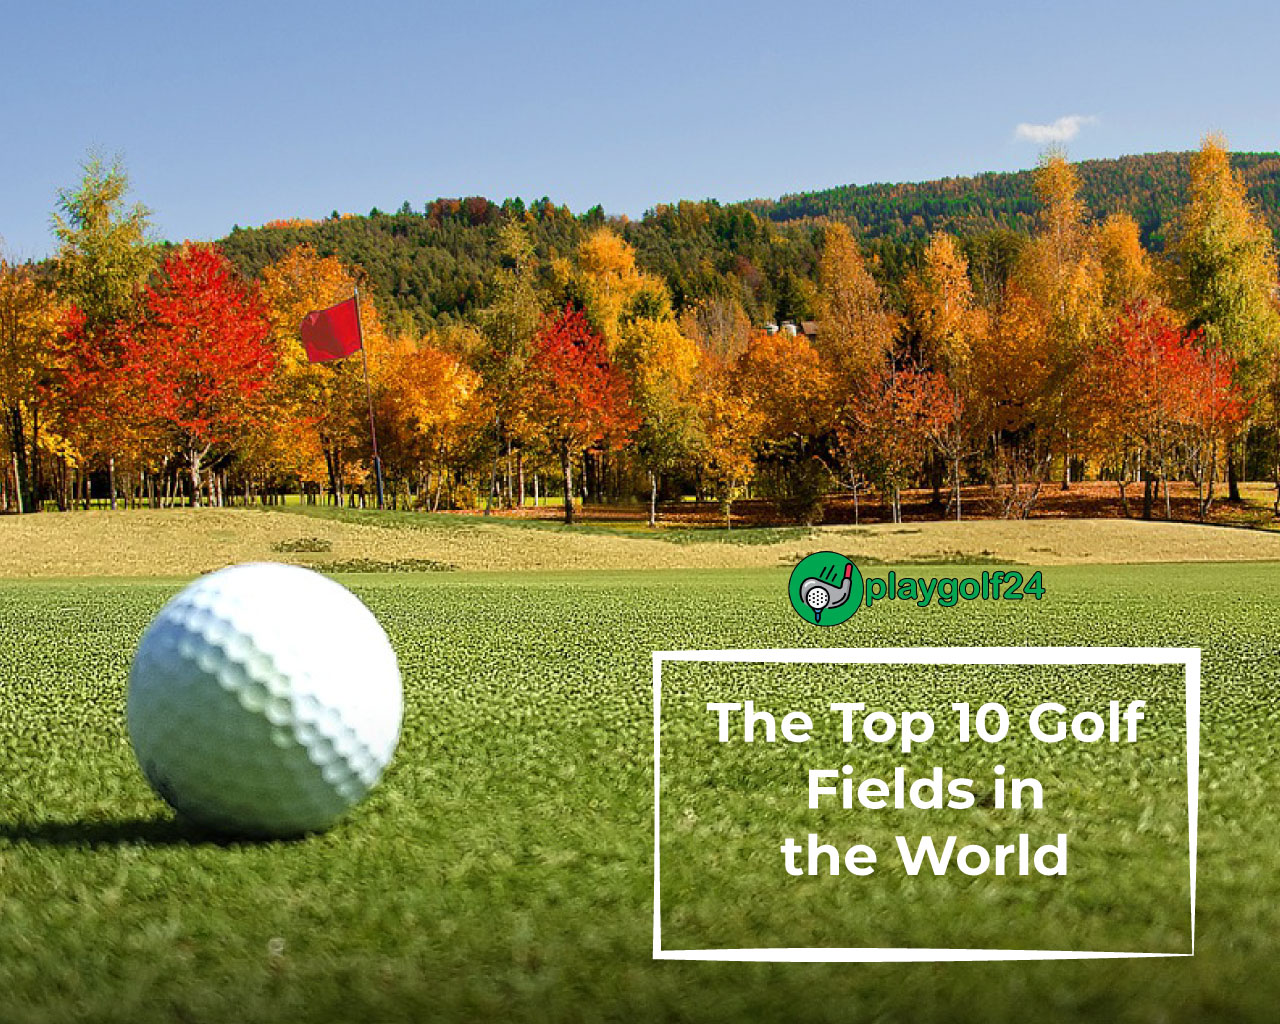 The Top 10 Golf Fields in the World